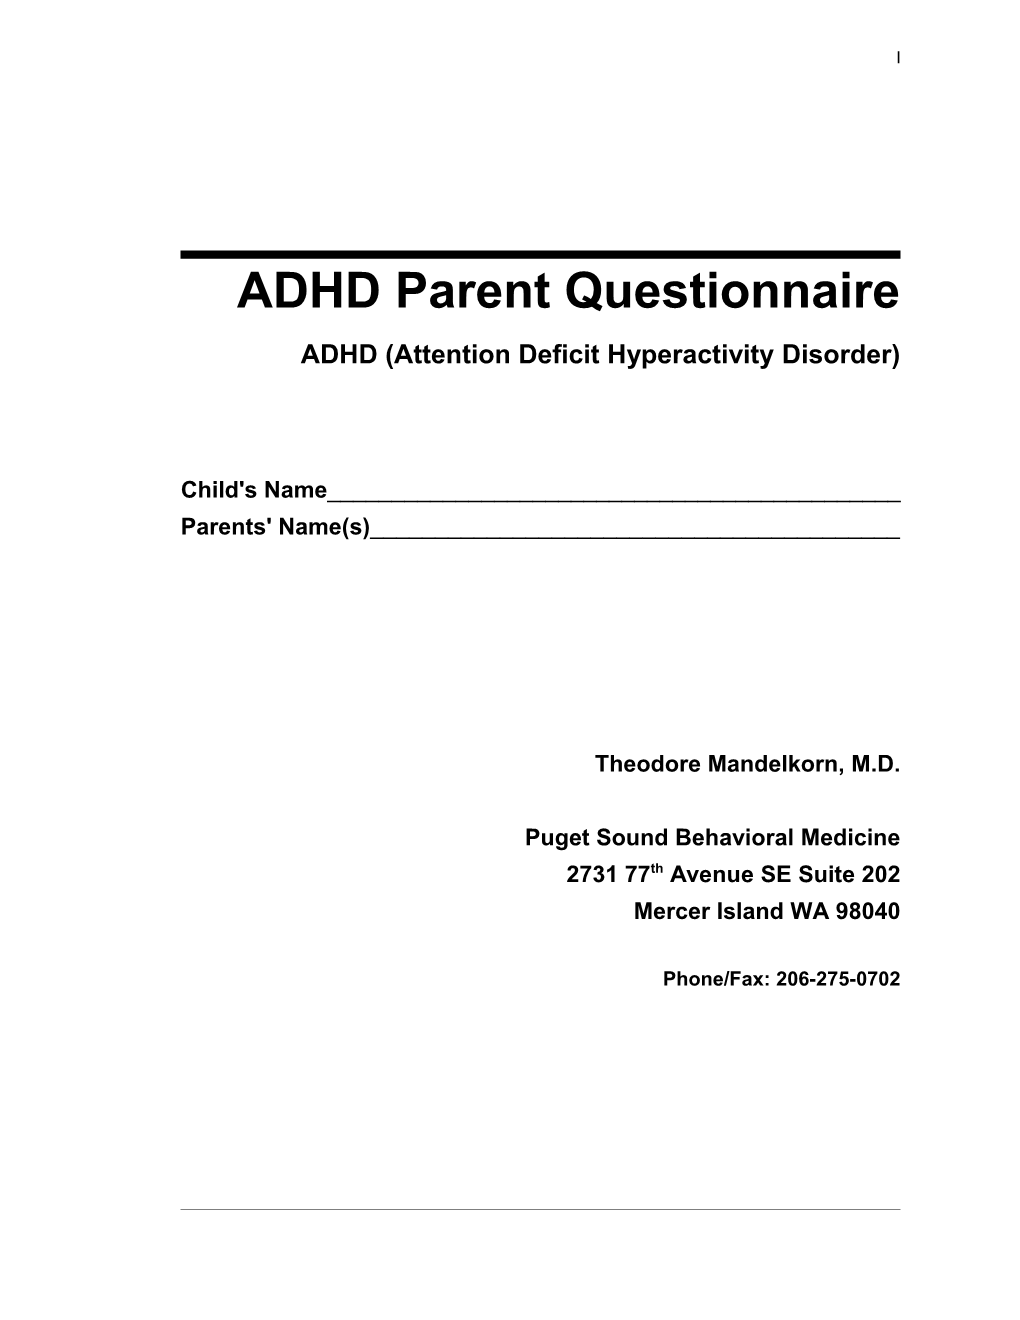 7Th Draft of the ADHD Parent Questionaire